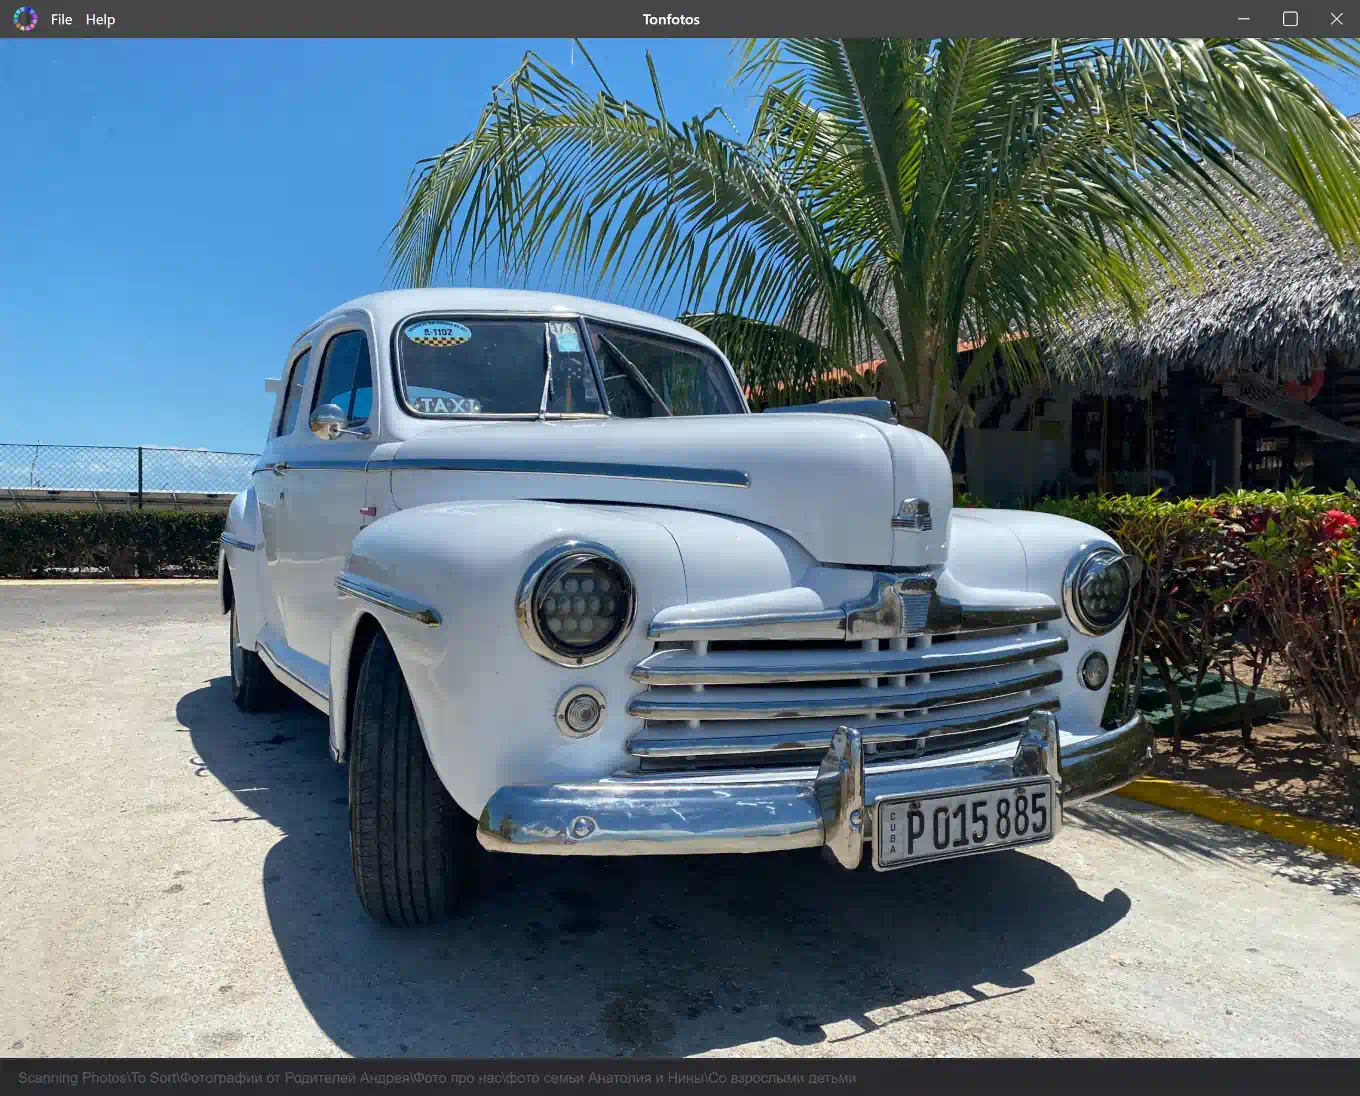 Viewing a photo of an antique car in Cuba in the Tonfotos Image Viewer application